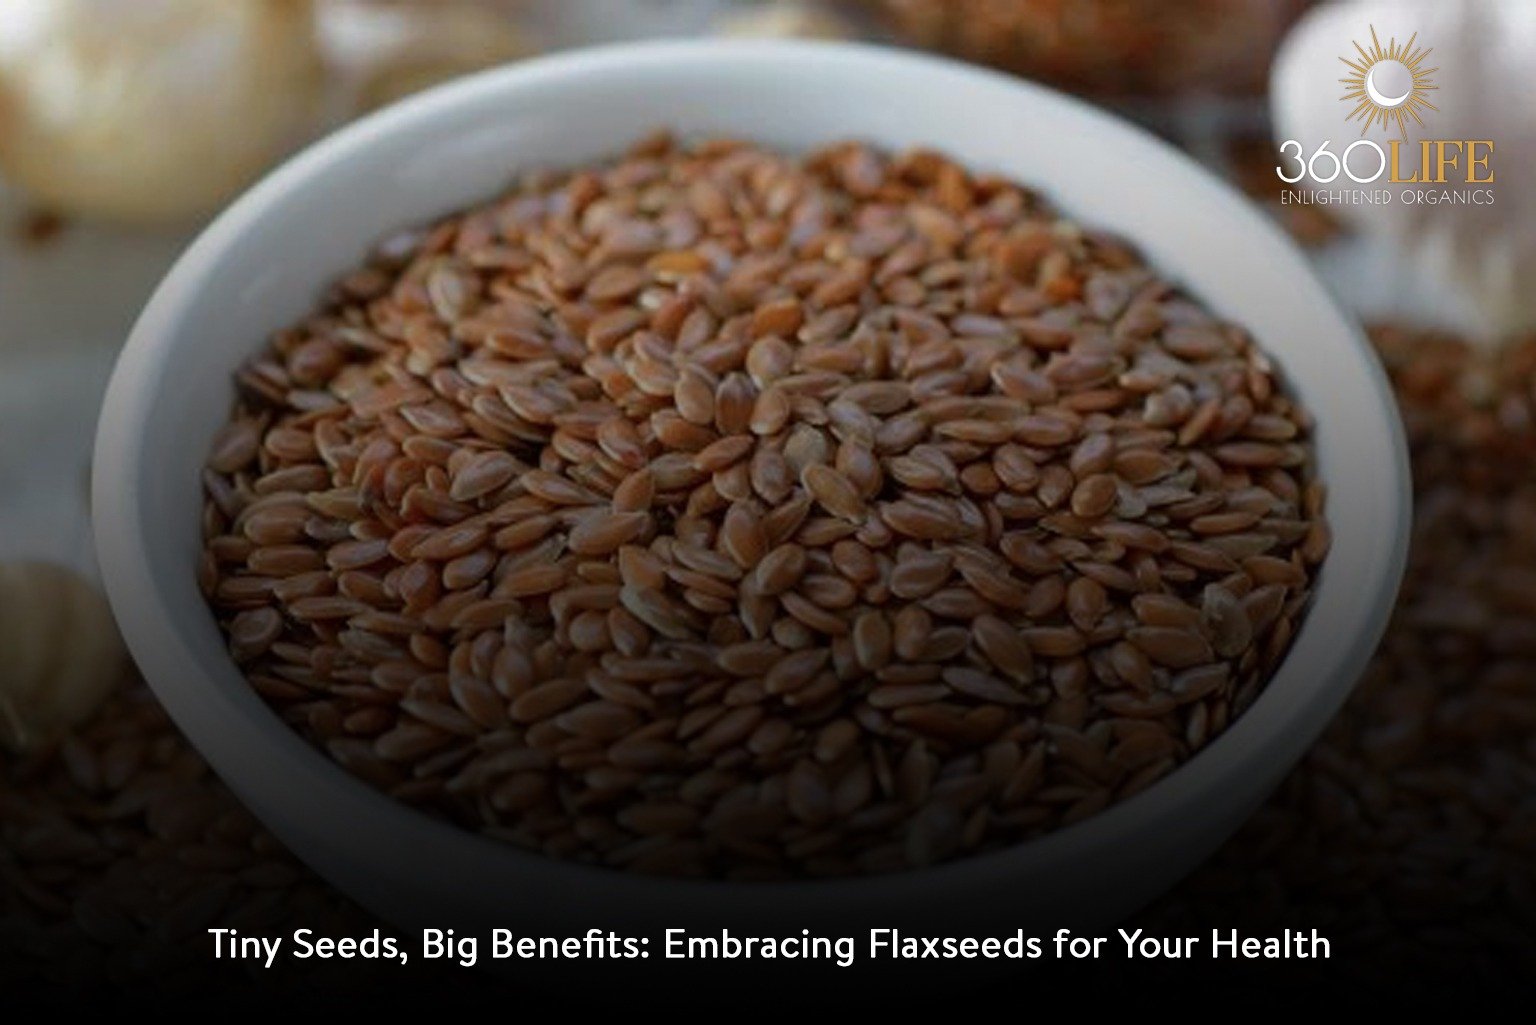 Tiny Seeds, Big Benefits: Embracing Flaxseeds for Your Health